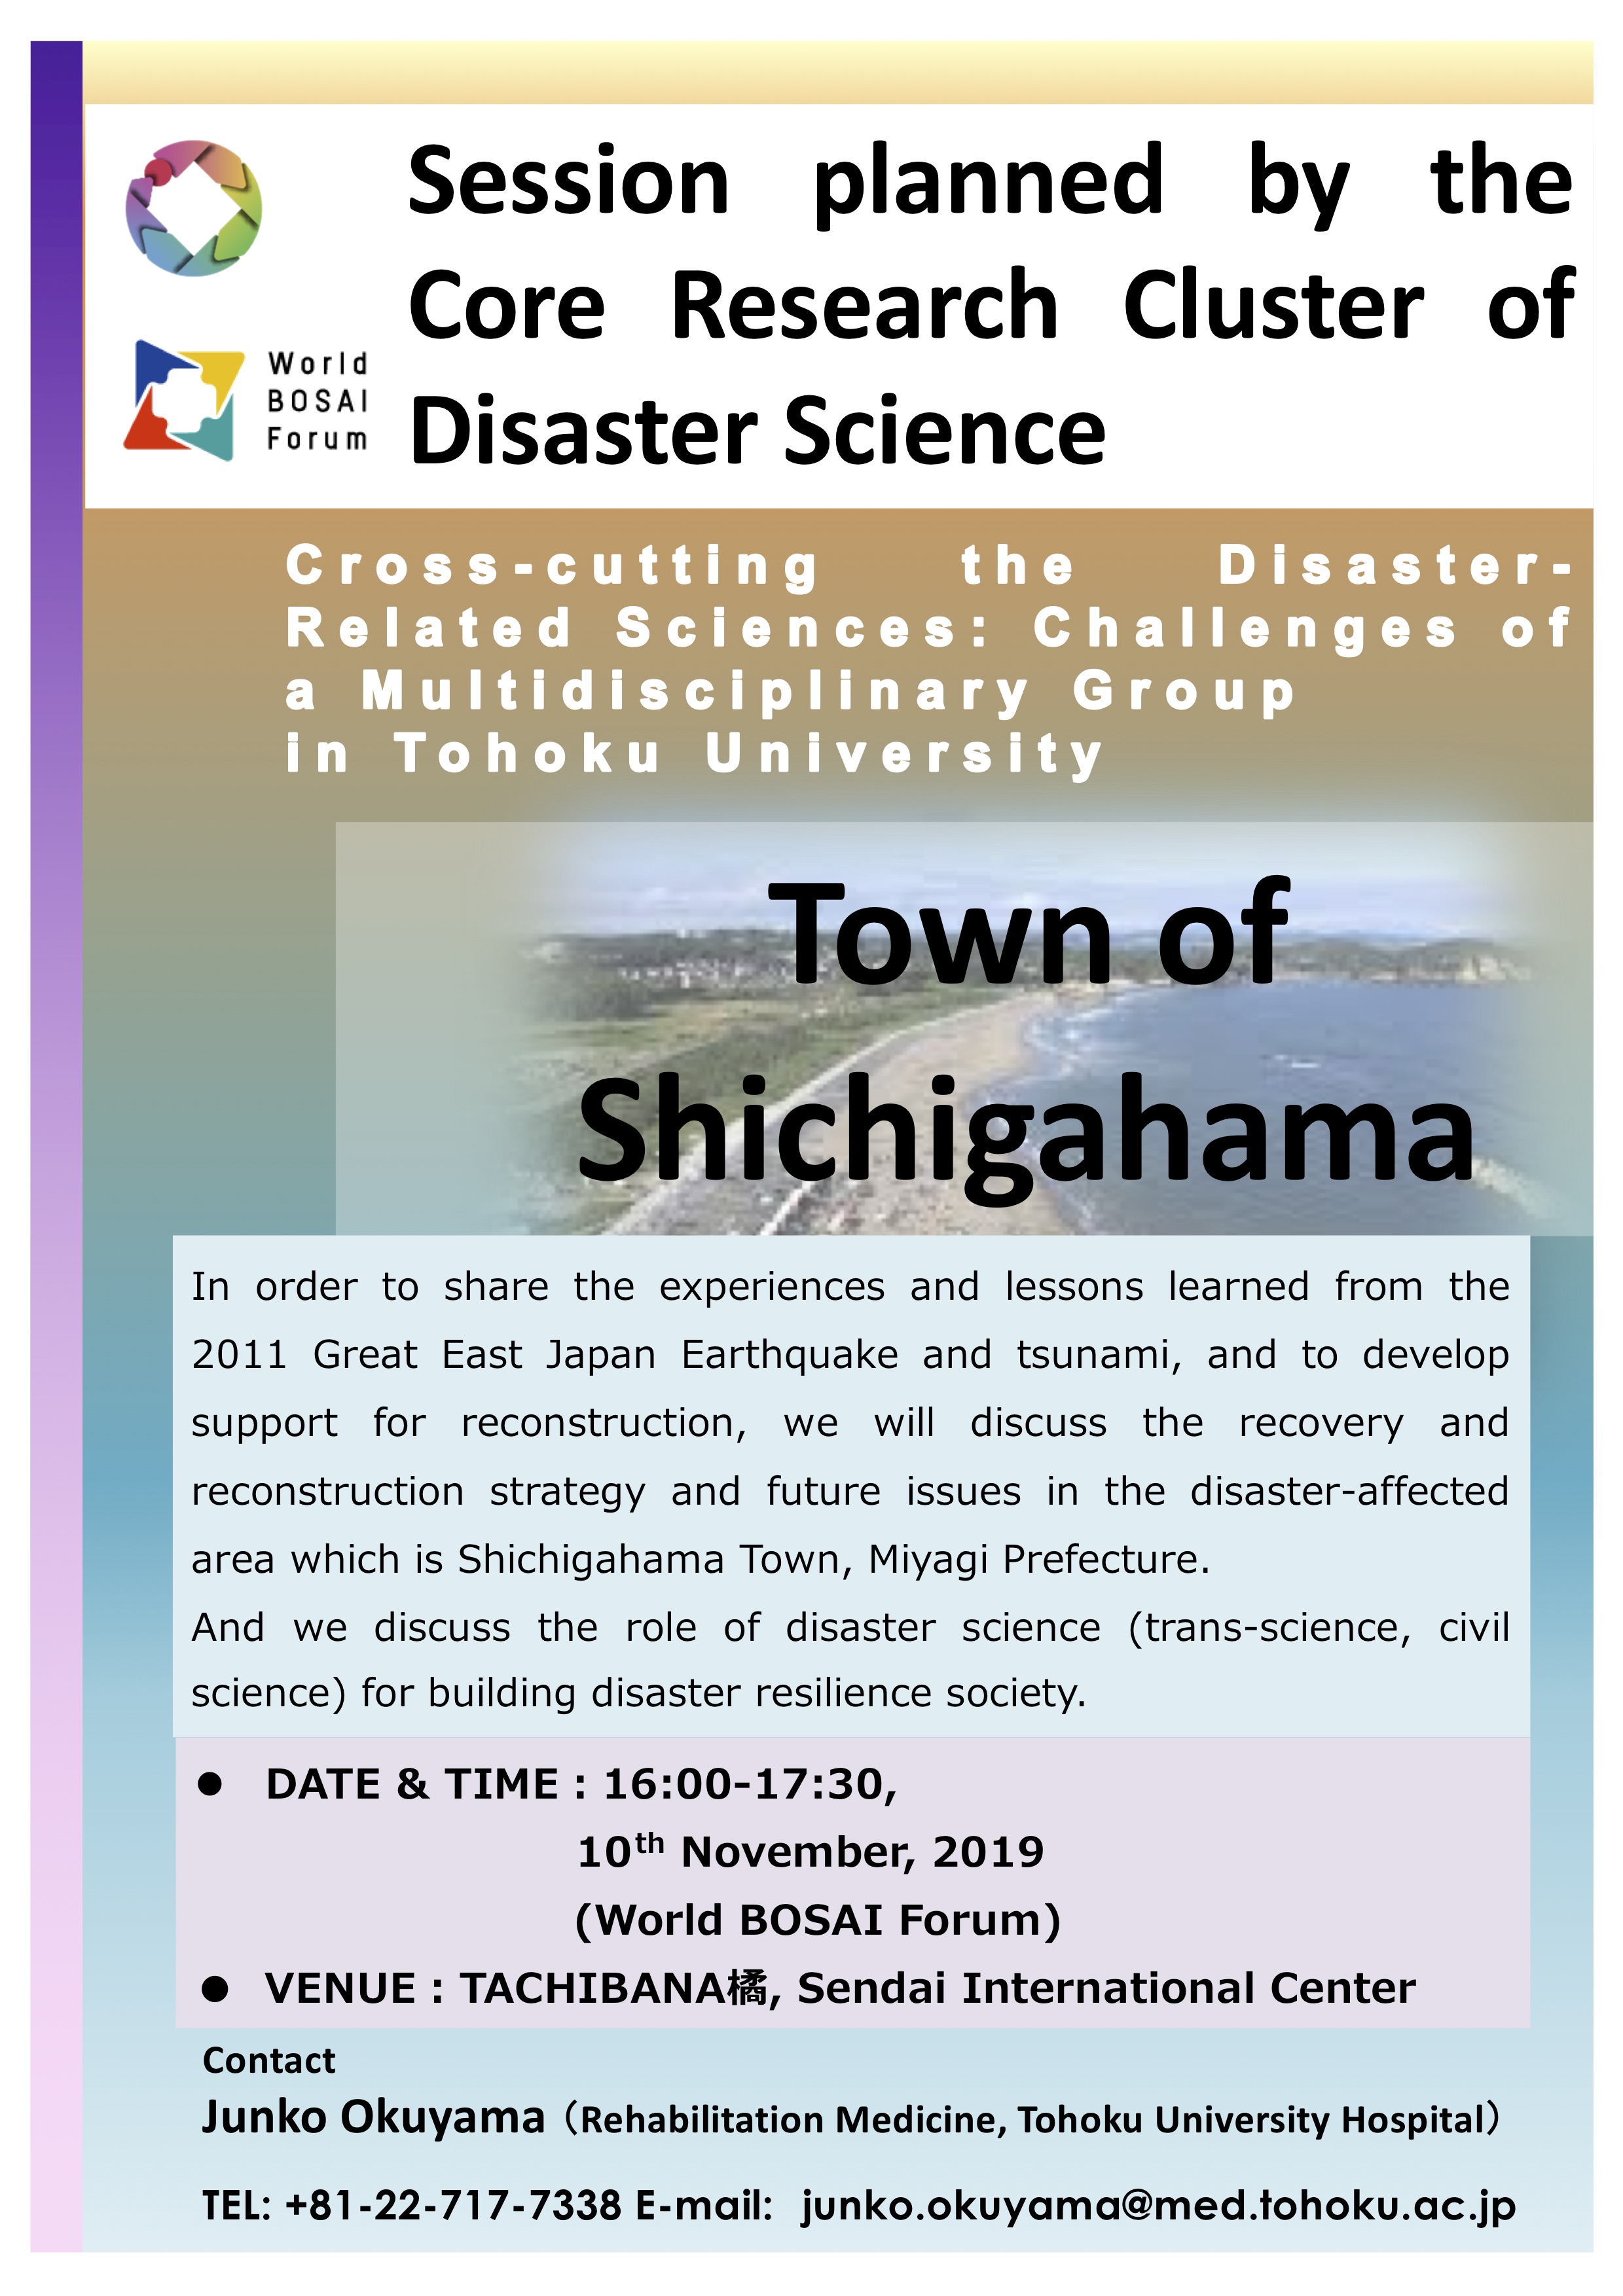 Session planned by the Core Research Cluster of Disaster Science in WBF2019